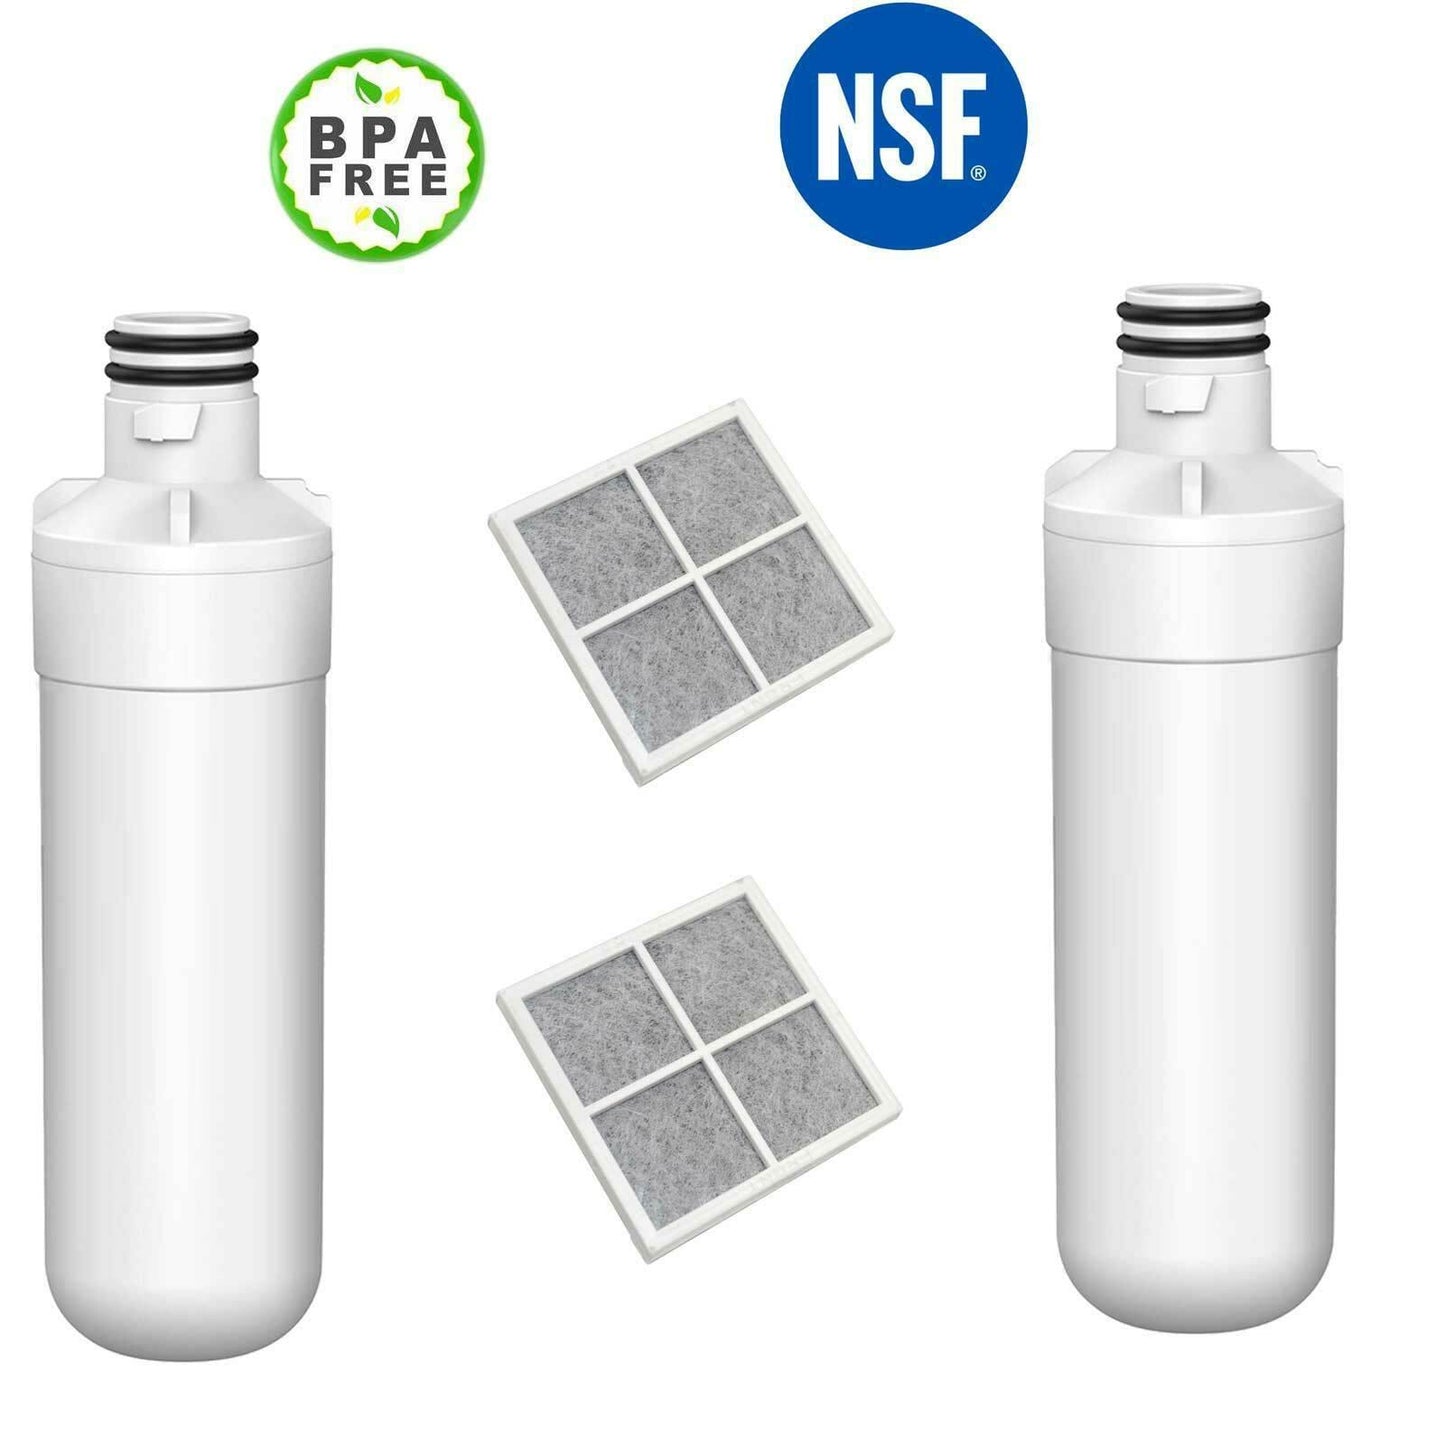 Fridge Water Filter For LG LT1000P MDJ64844601 ADQ74793501 with Air Filter Sparesbarn